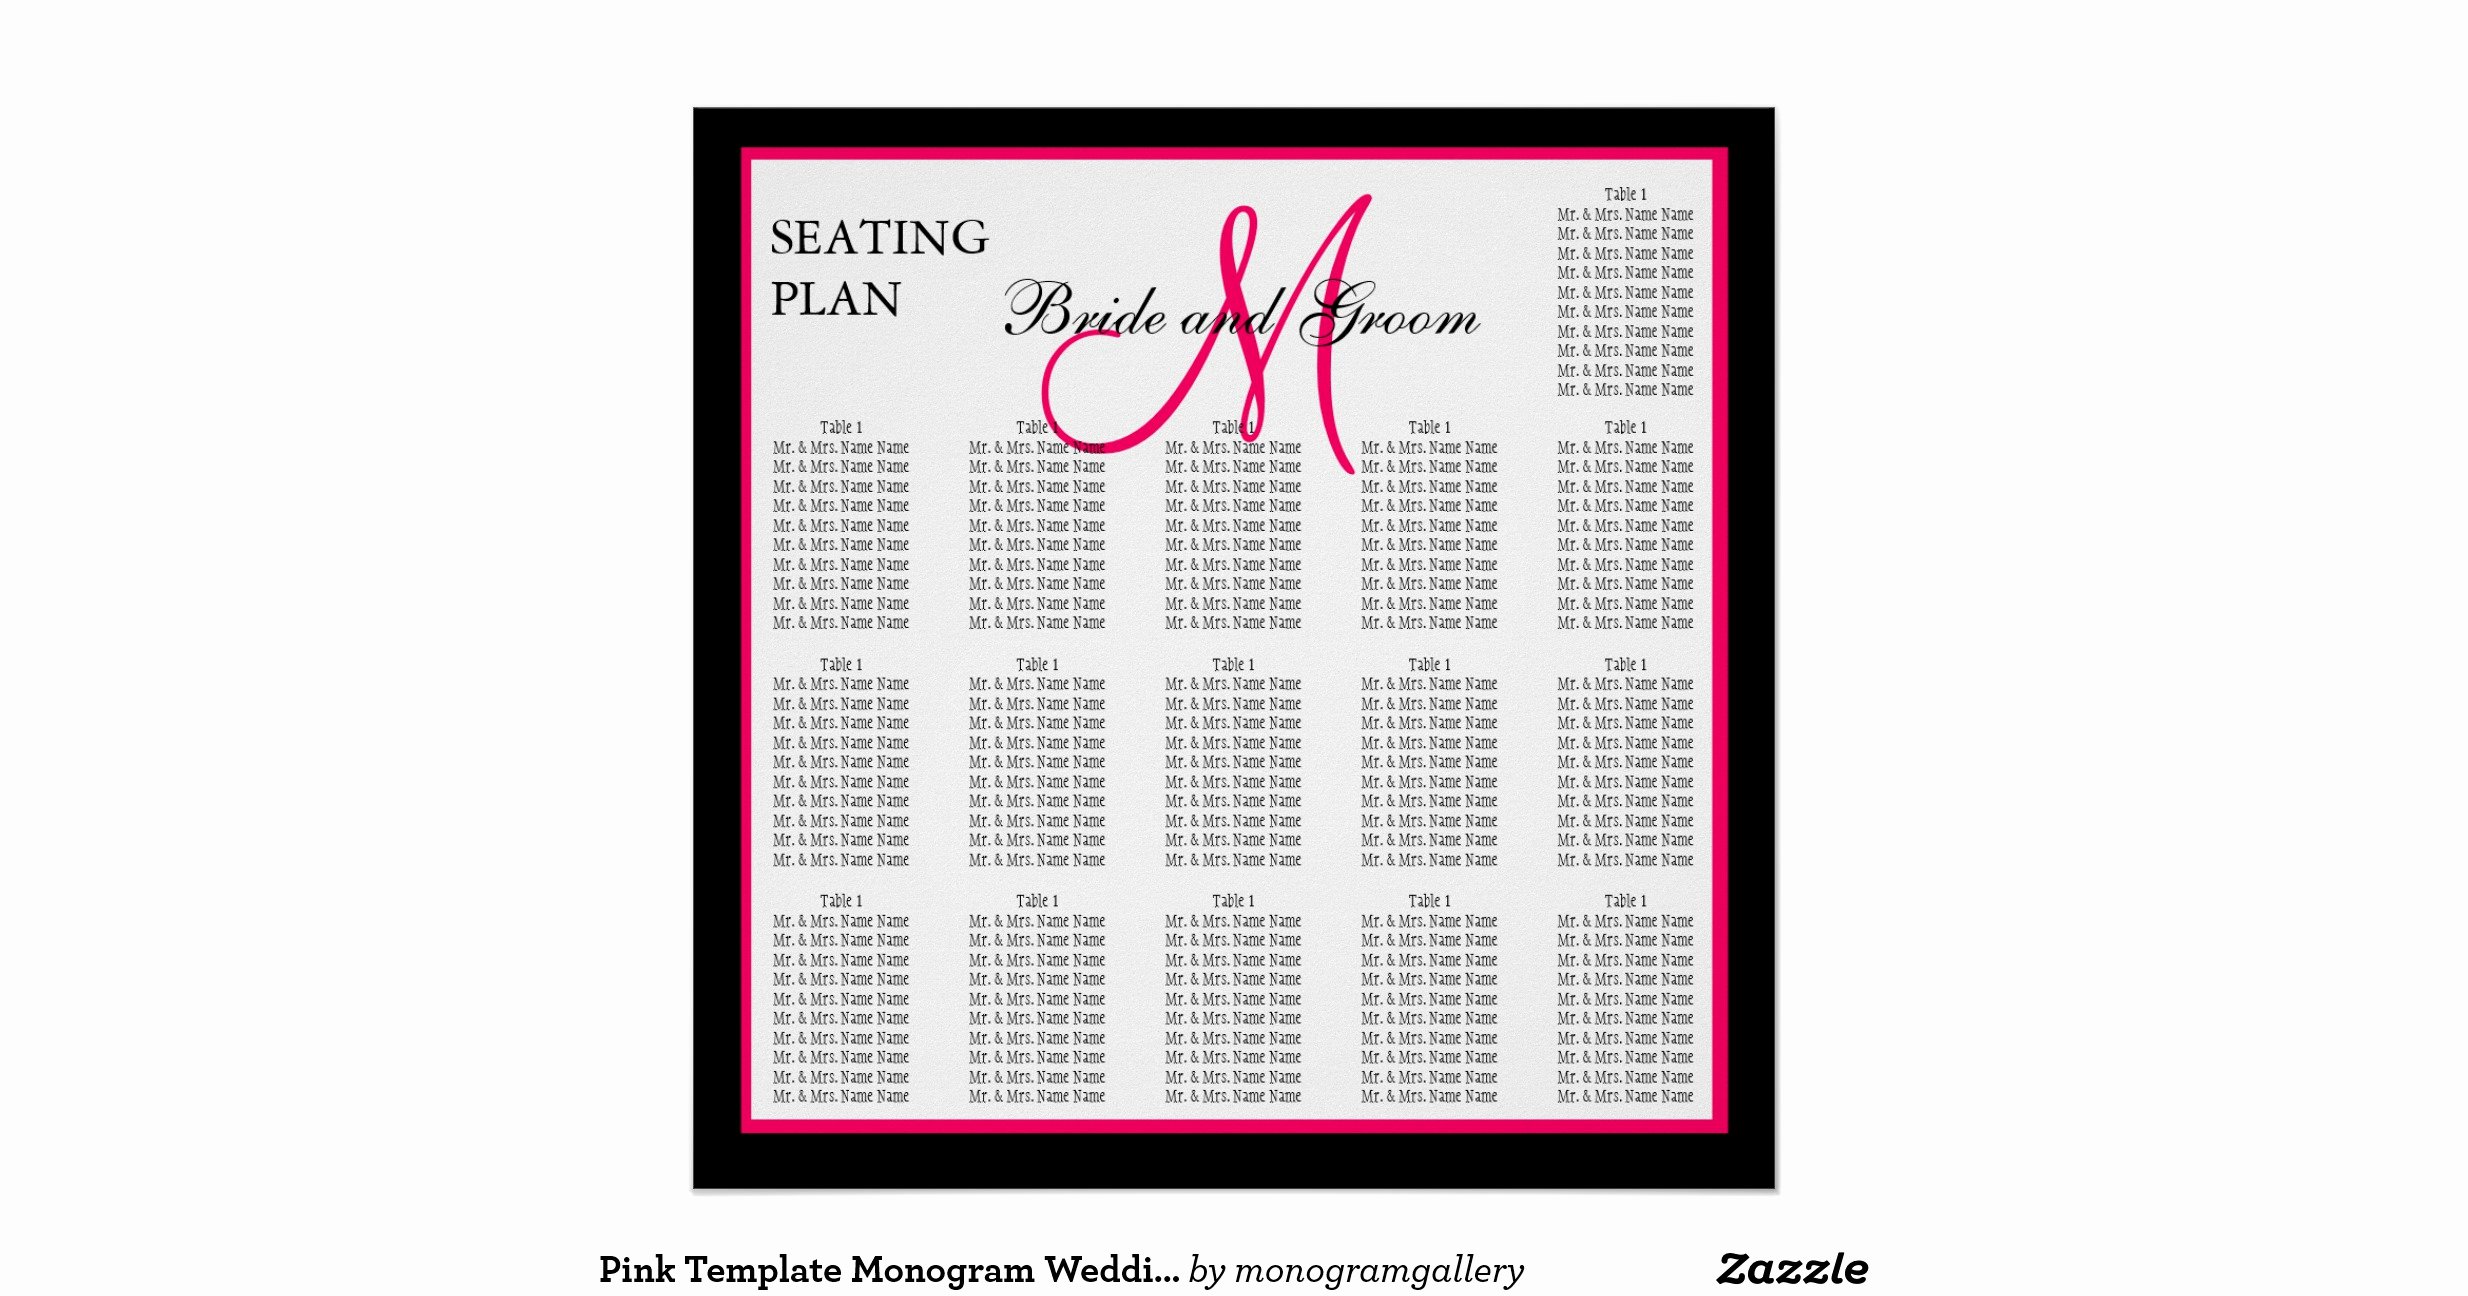 Seating Chart Poster Template Unique Pink Template Monogram Wedding Seating Chart Poster